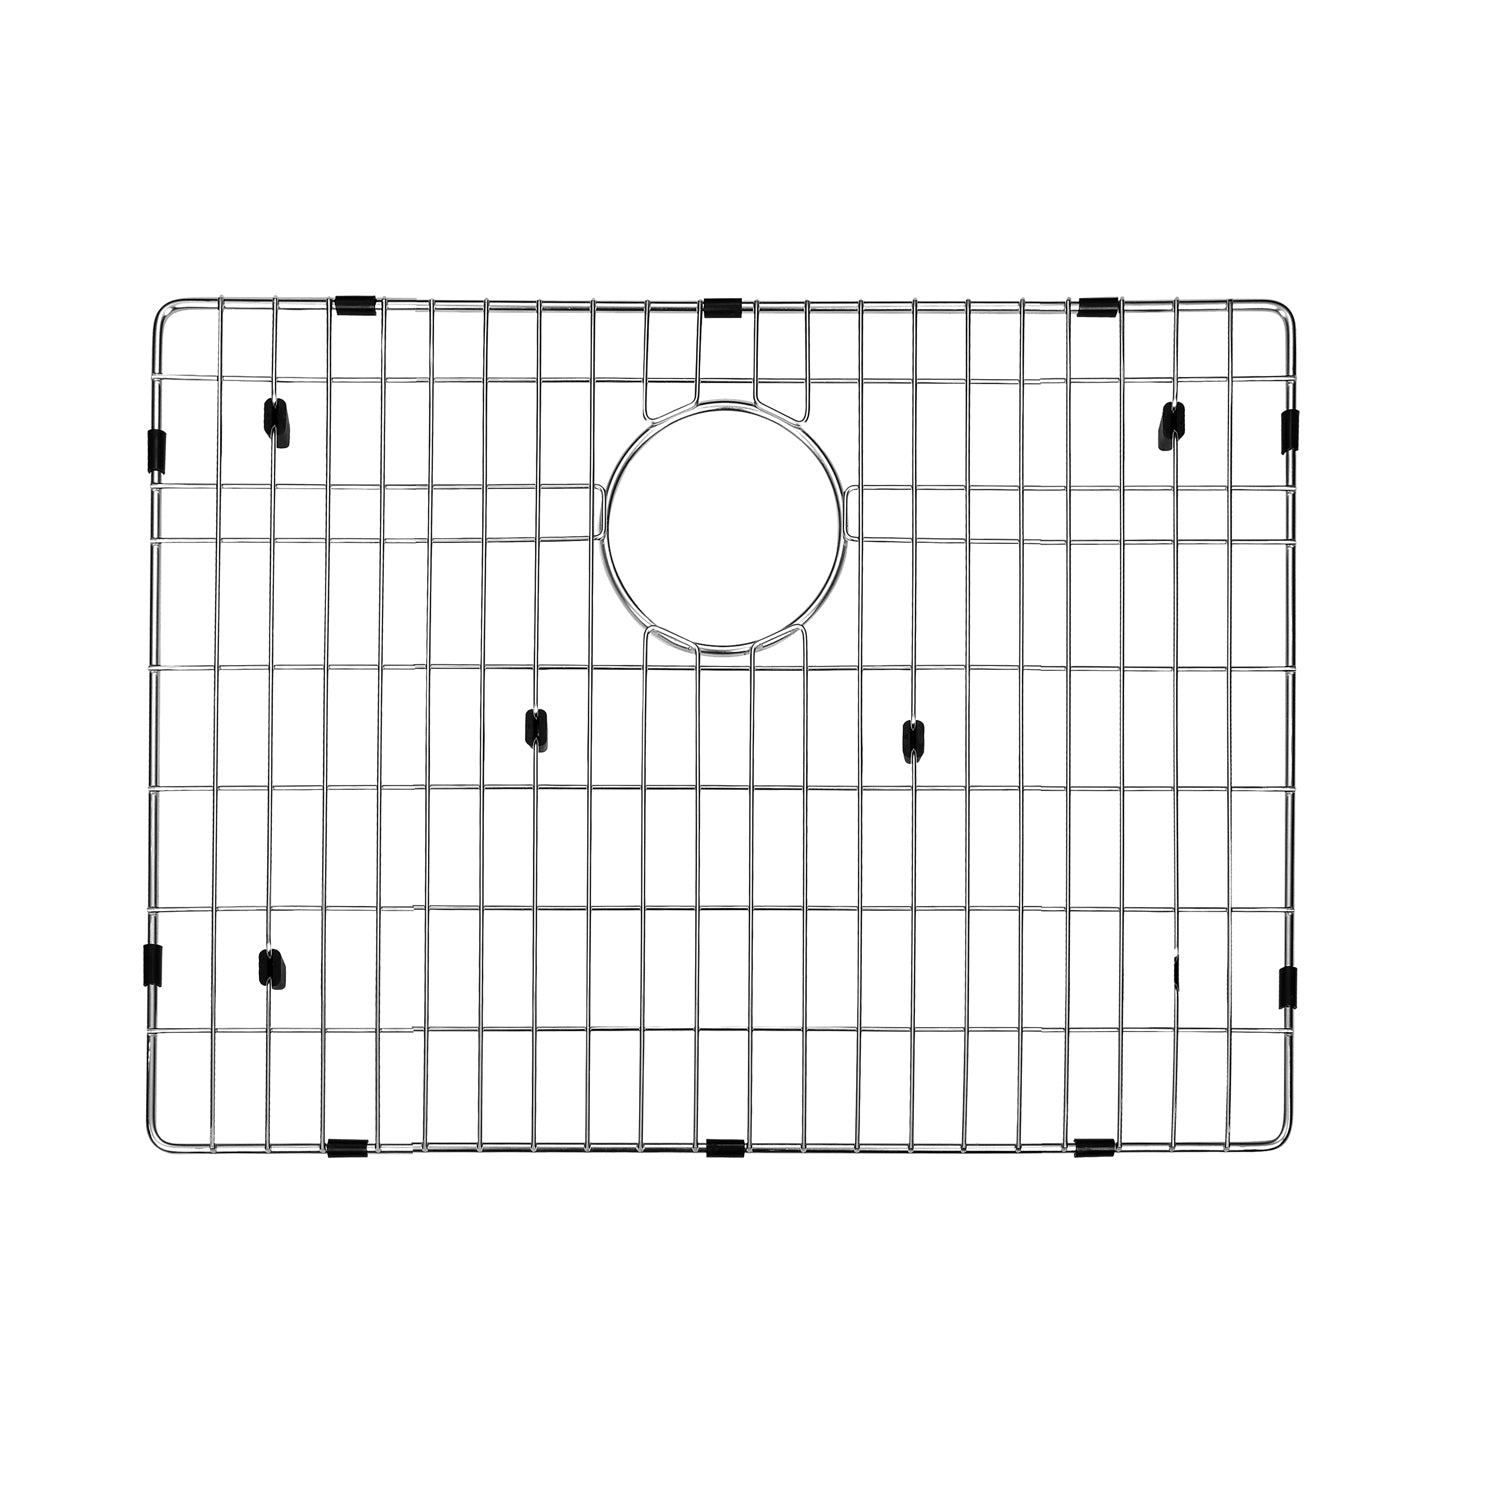 DAX Grid for Kitchen Sink, Stainless Steel Body, Chrome Finish, Compatible with DAX-SQ-2318, 21 x 16-1/4 Inches (GRID-SQ2318)